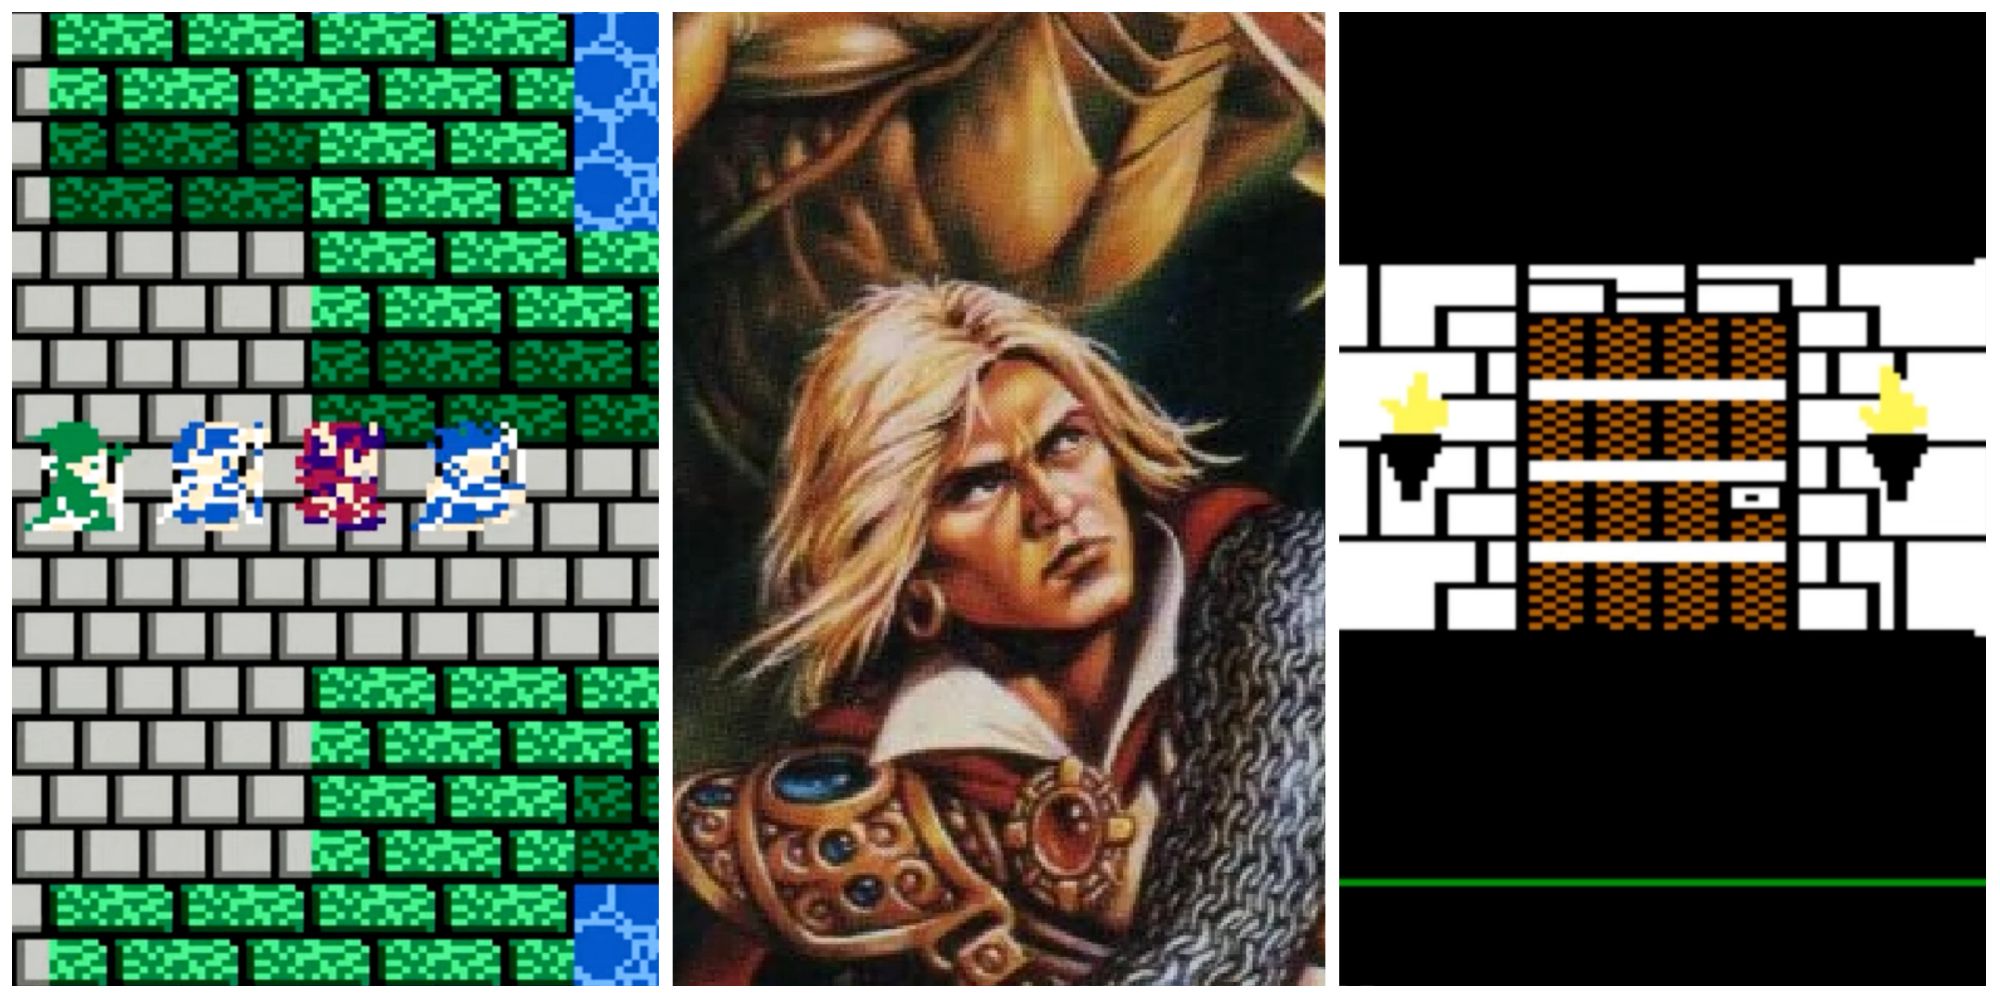 A collage of images from Dragon Quest 3, Pool Of Radiance, and Might And Magic